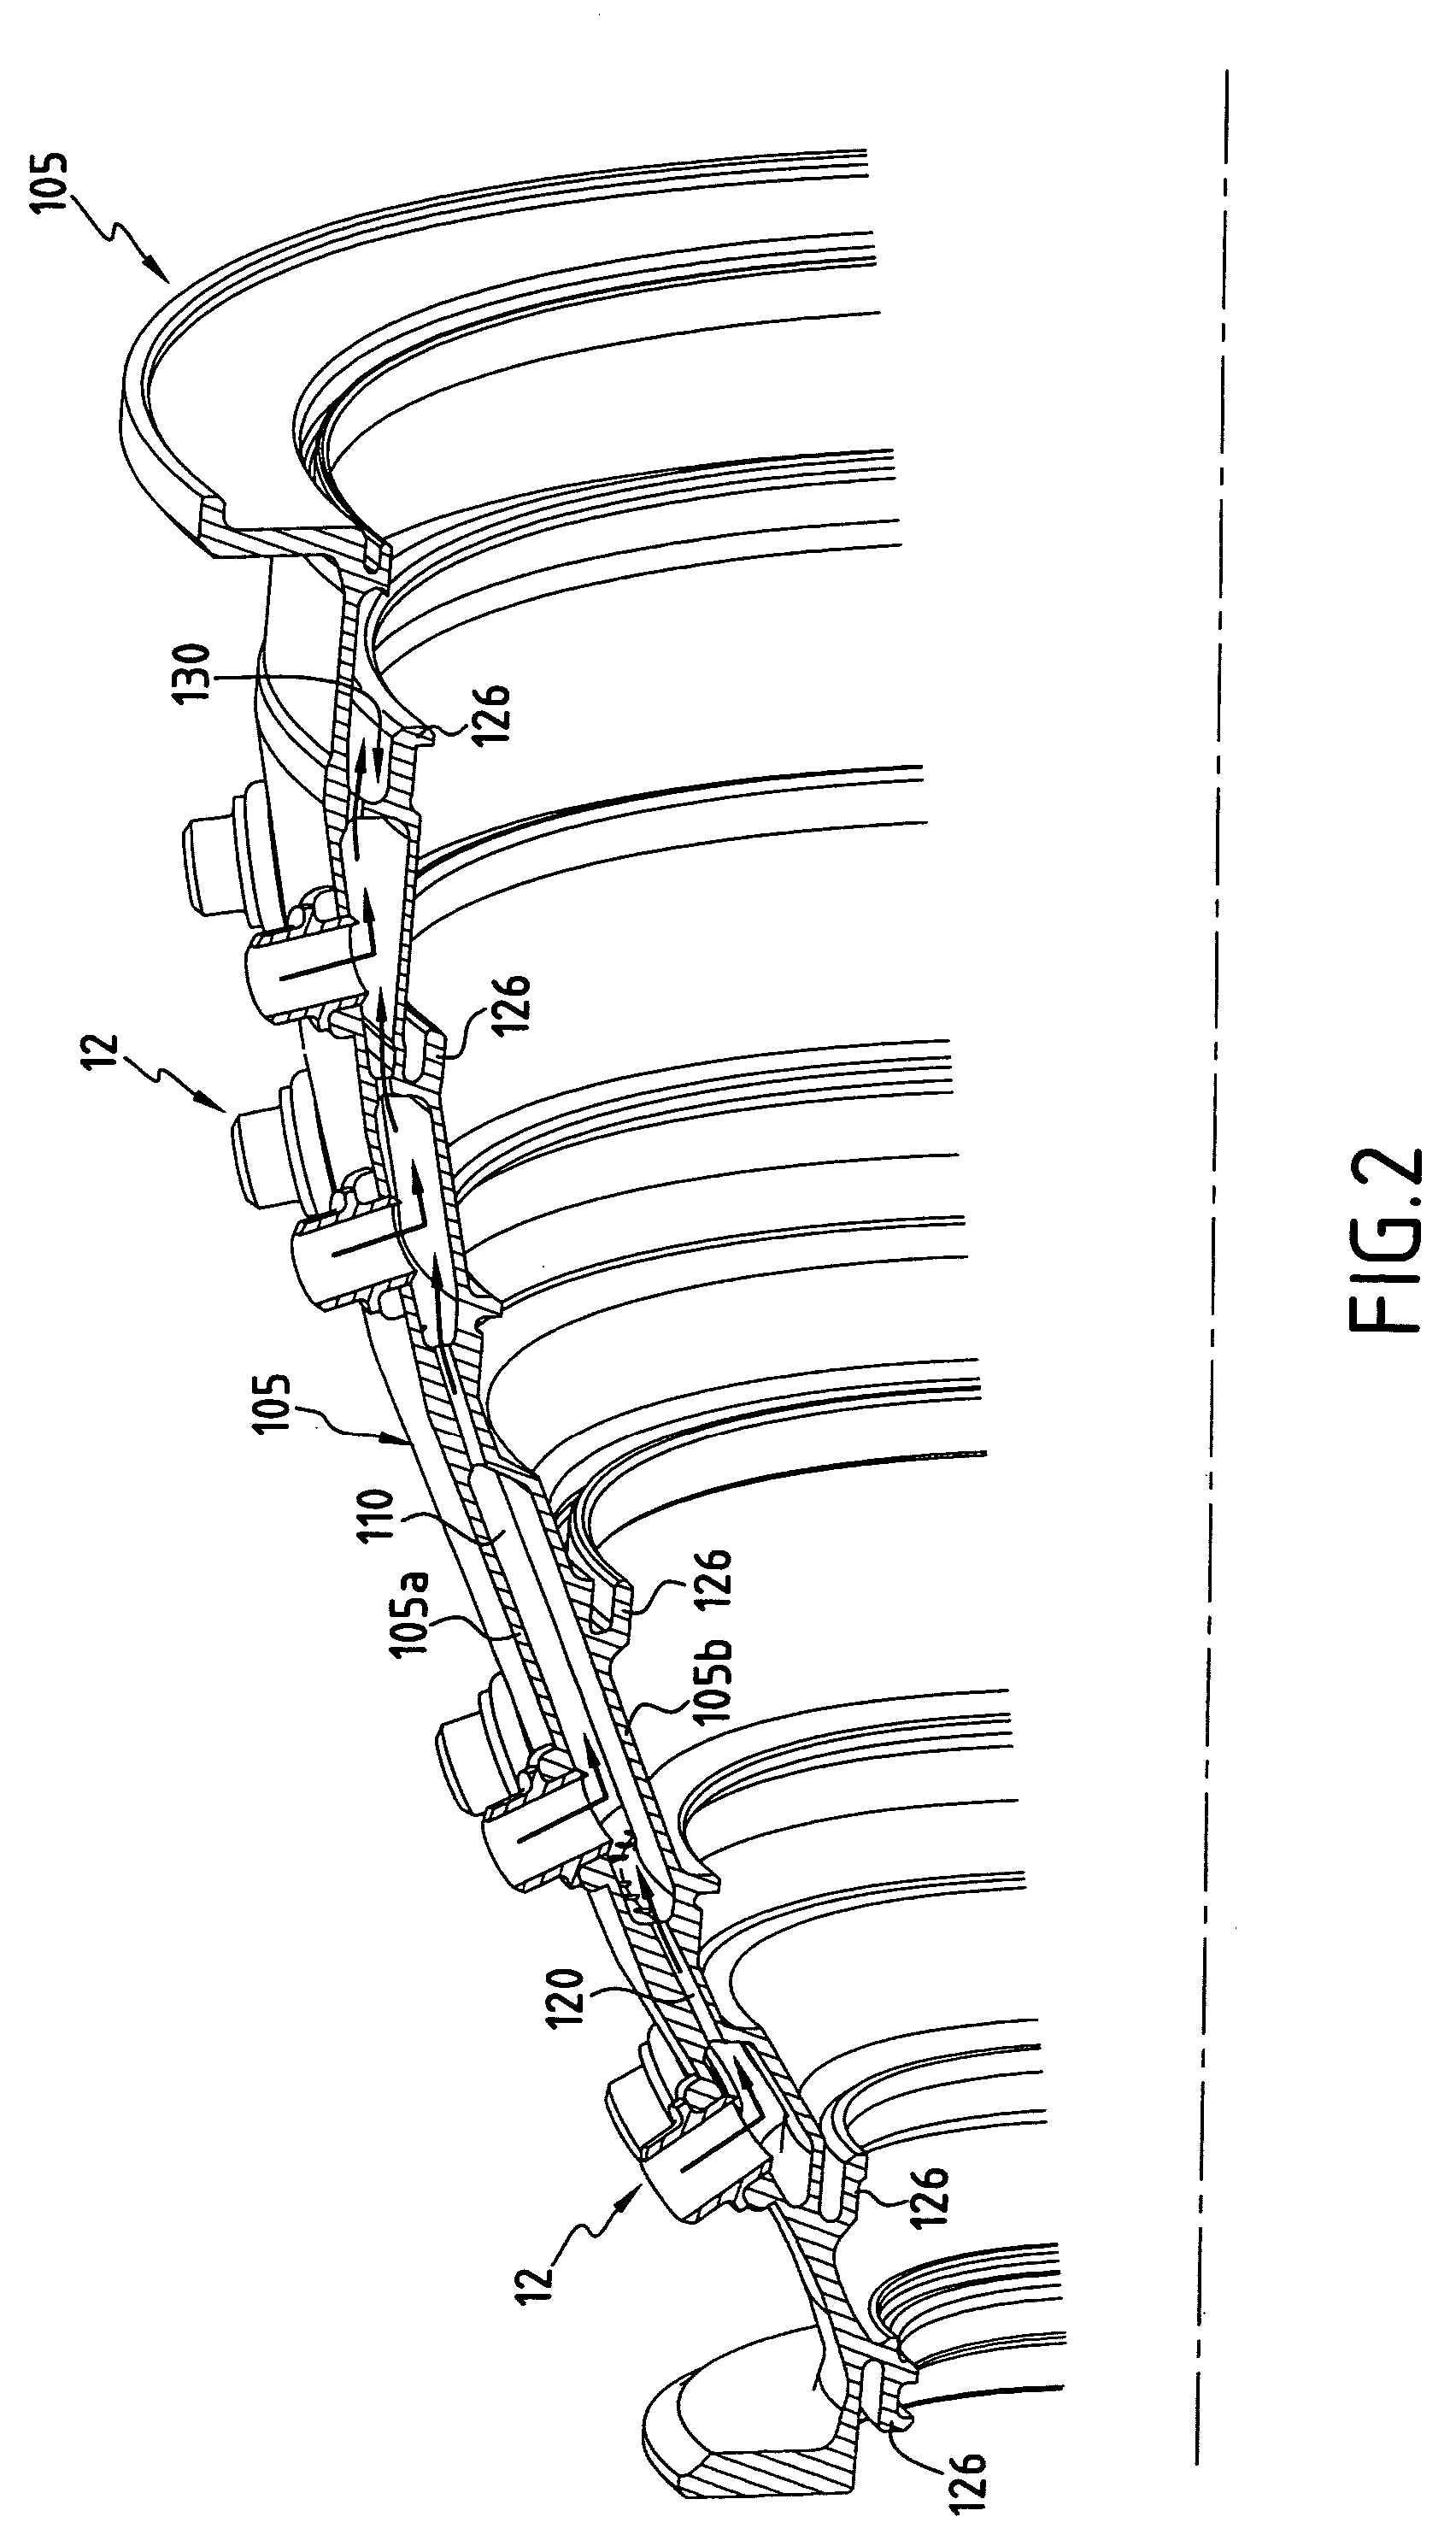 Method of fabricating a casing for turbine stator